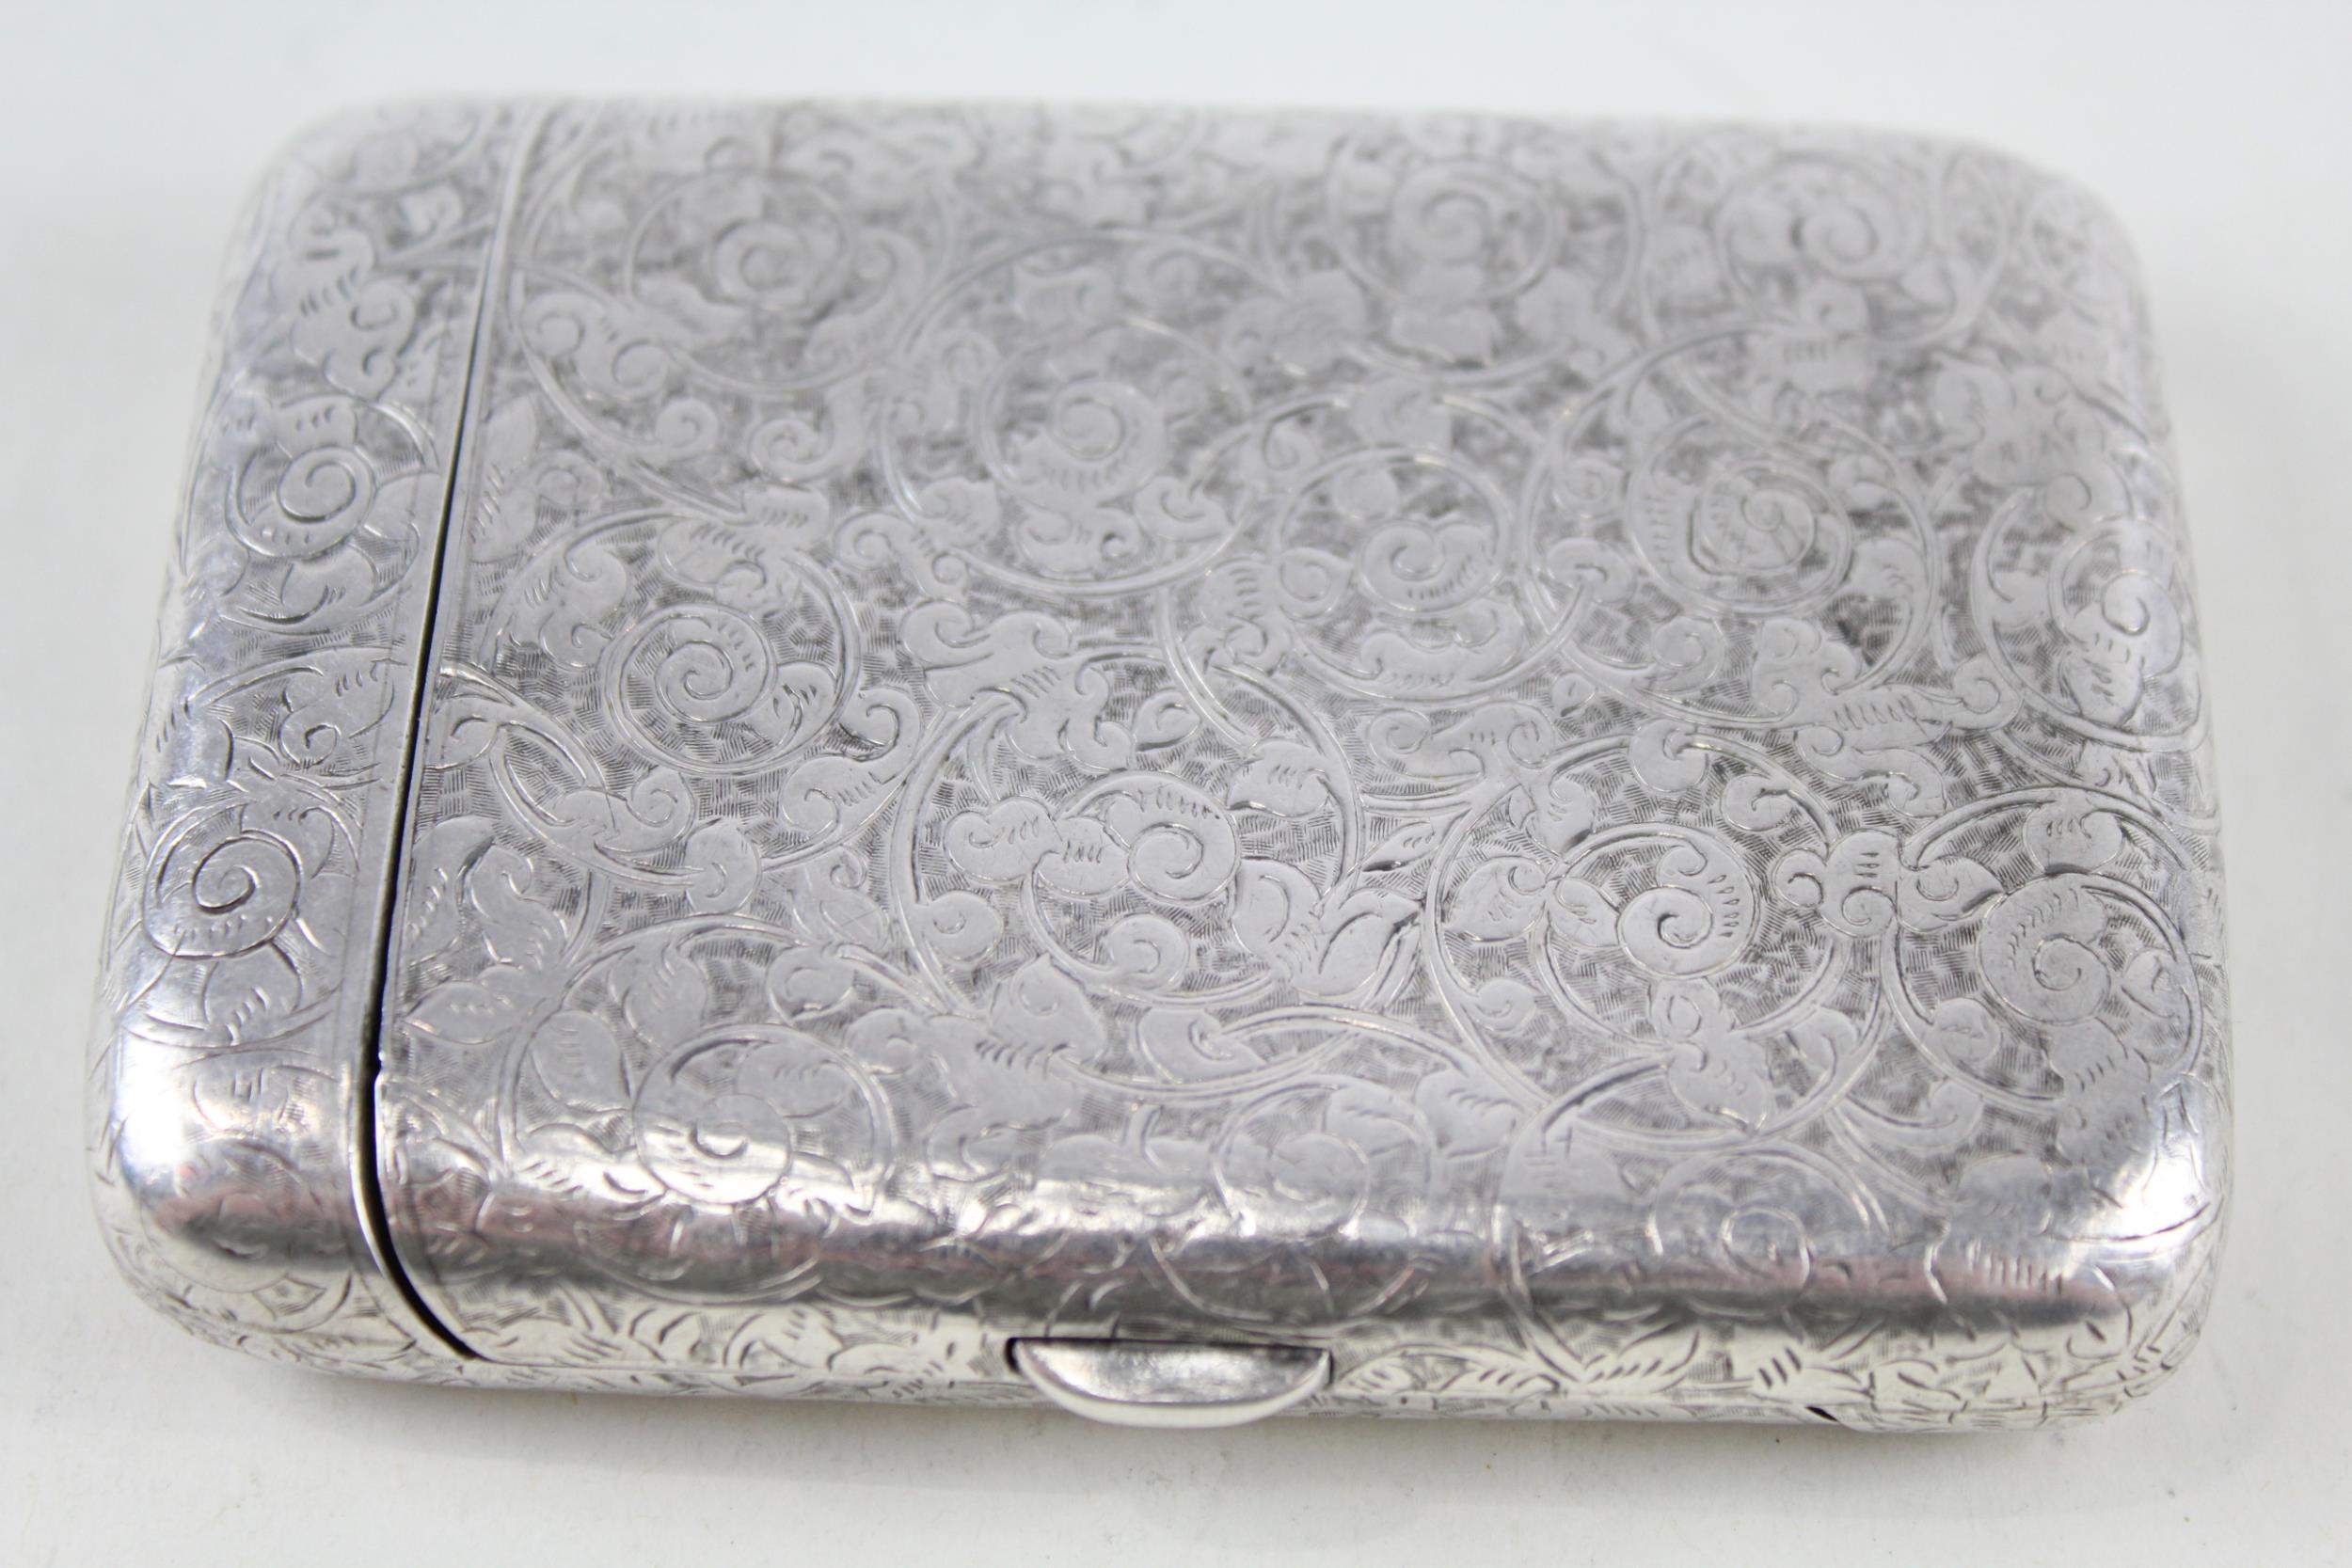 Antique Victorian HM 1887 Birmingham Sterling Silver Cigarette Case (85g) - w/ Personal Engraving - Image 5 of 5